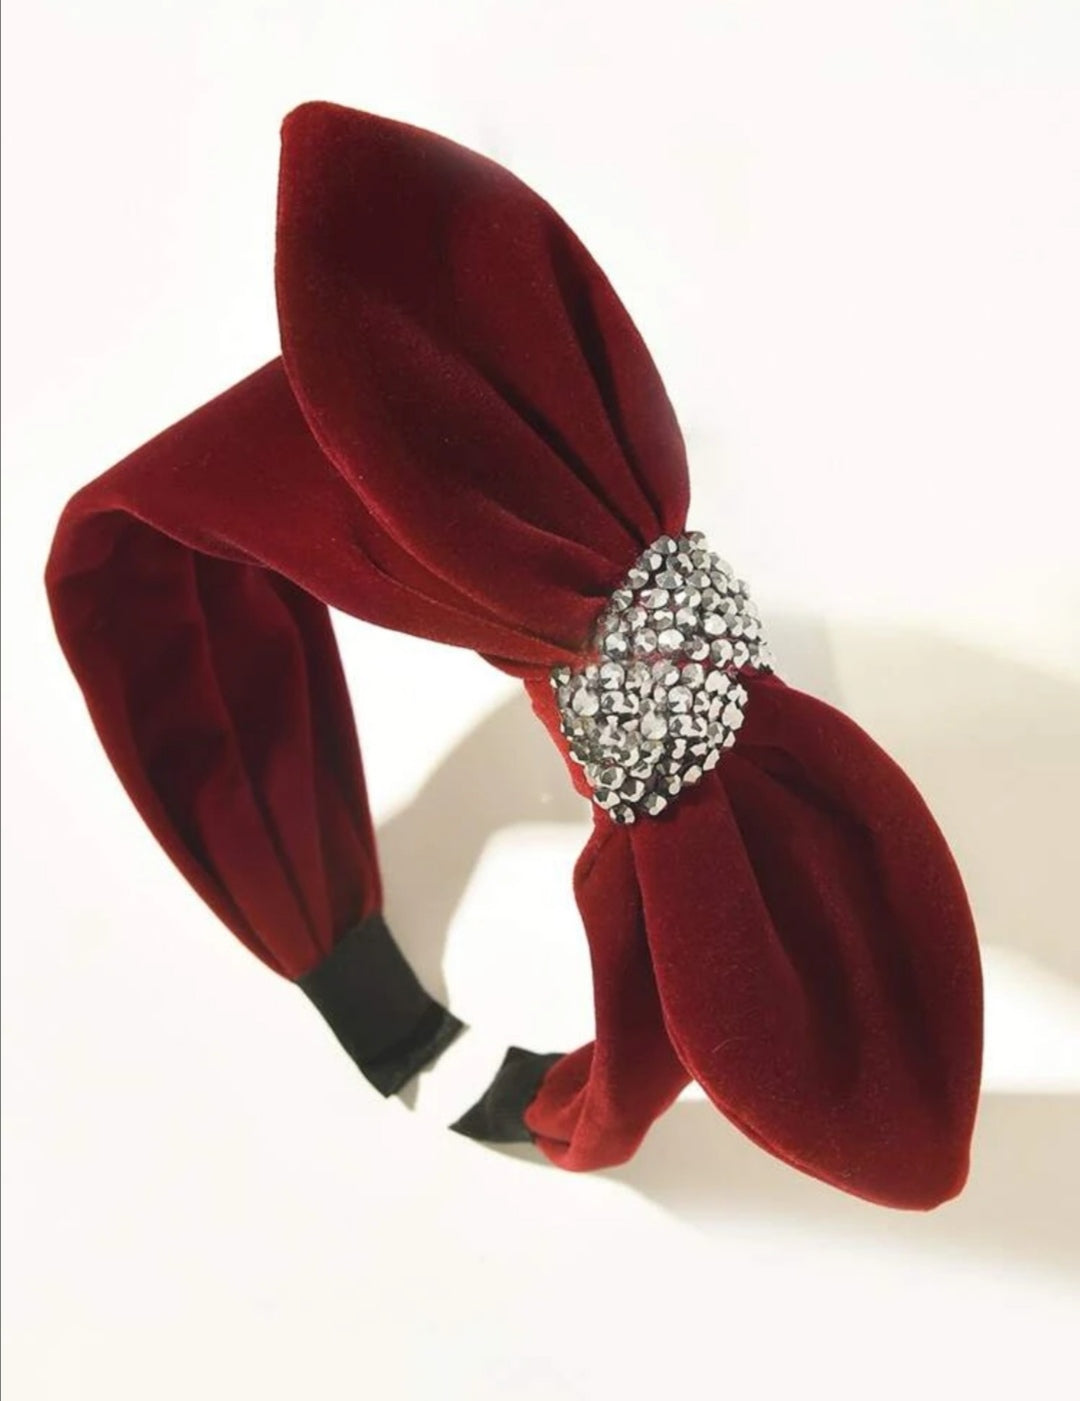 Luxe Rouge Bow